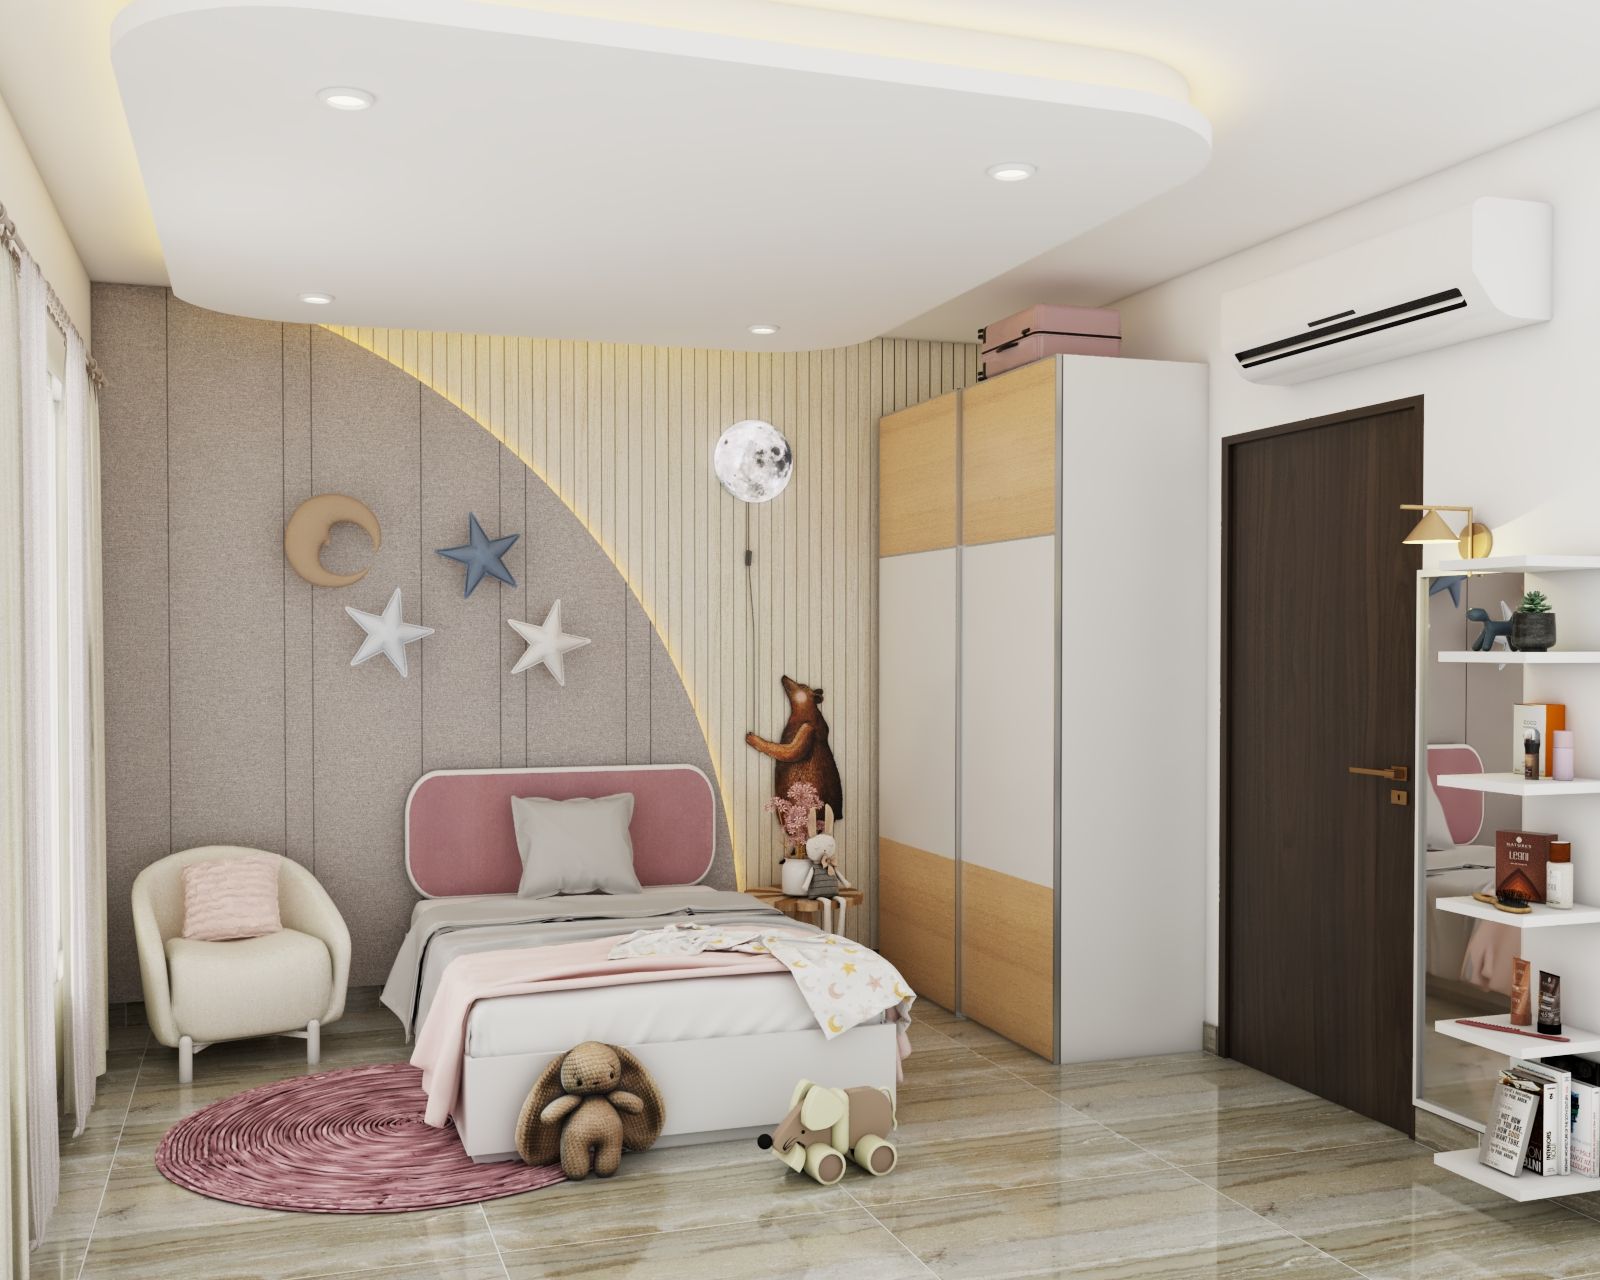 Contemporary Kids Bedroom Design With Open And Closed Storage